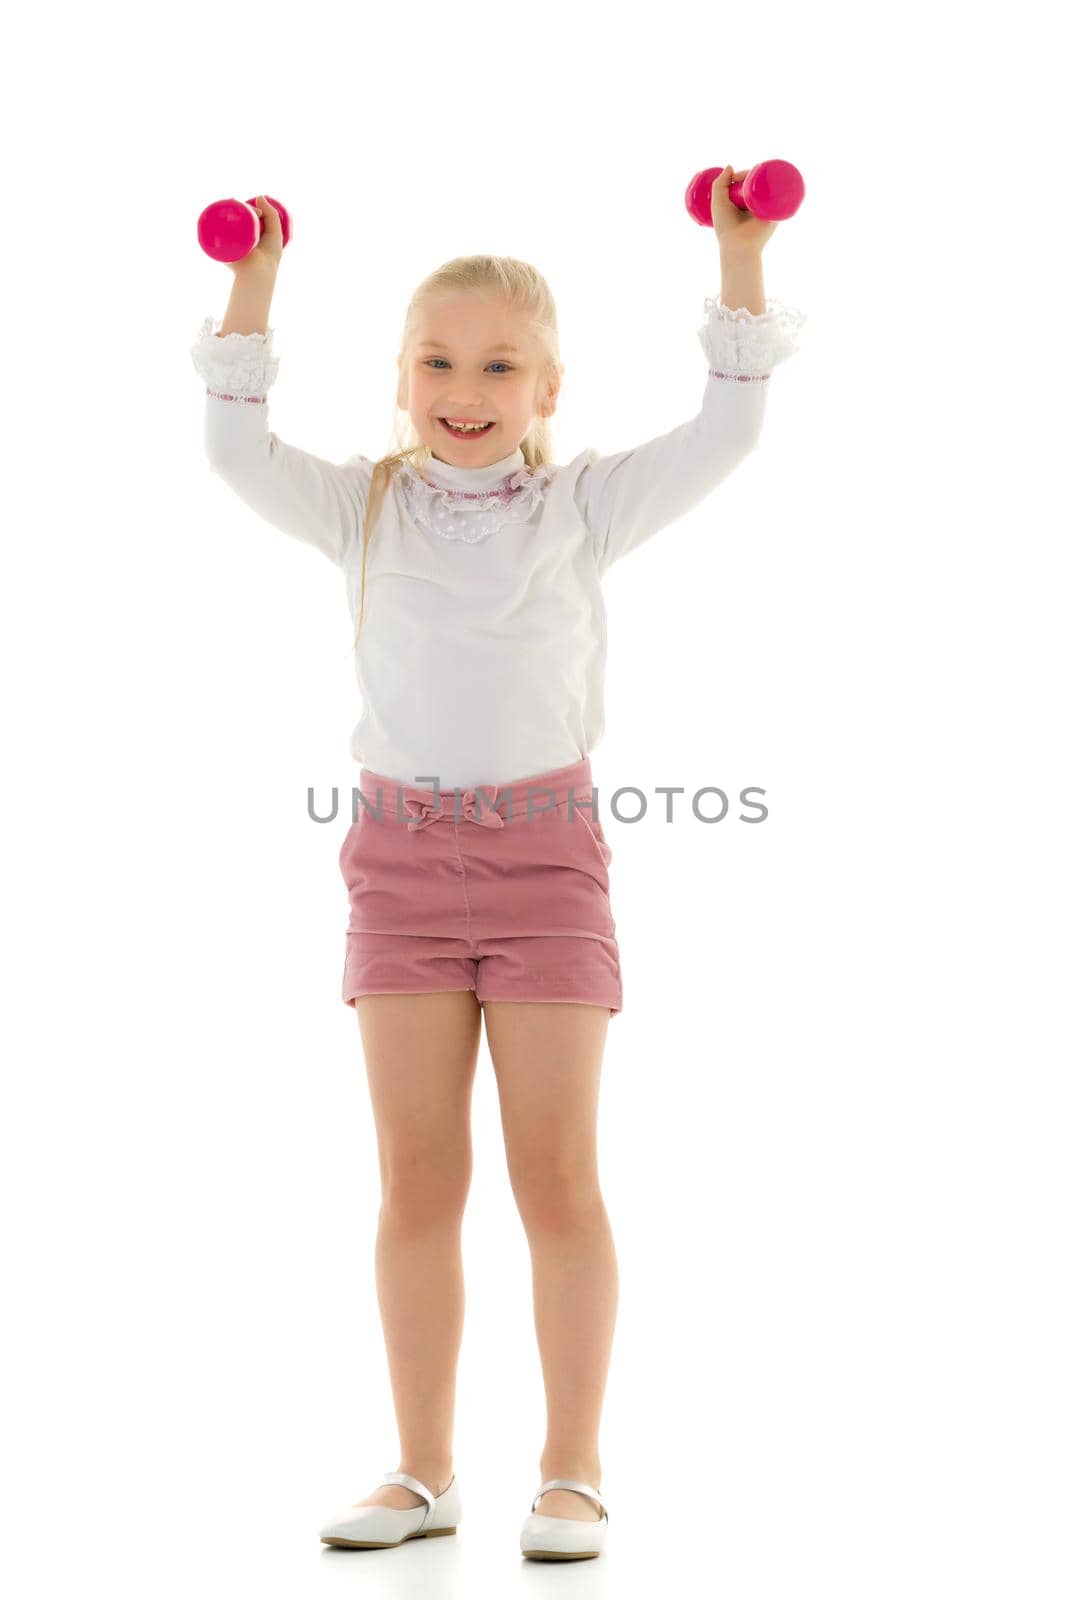 A cute little girl doing exercises with dumbbells. The concept of strength, health and sport. Isolated on white background.